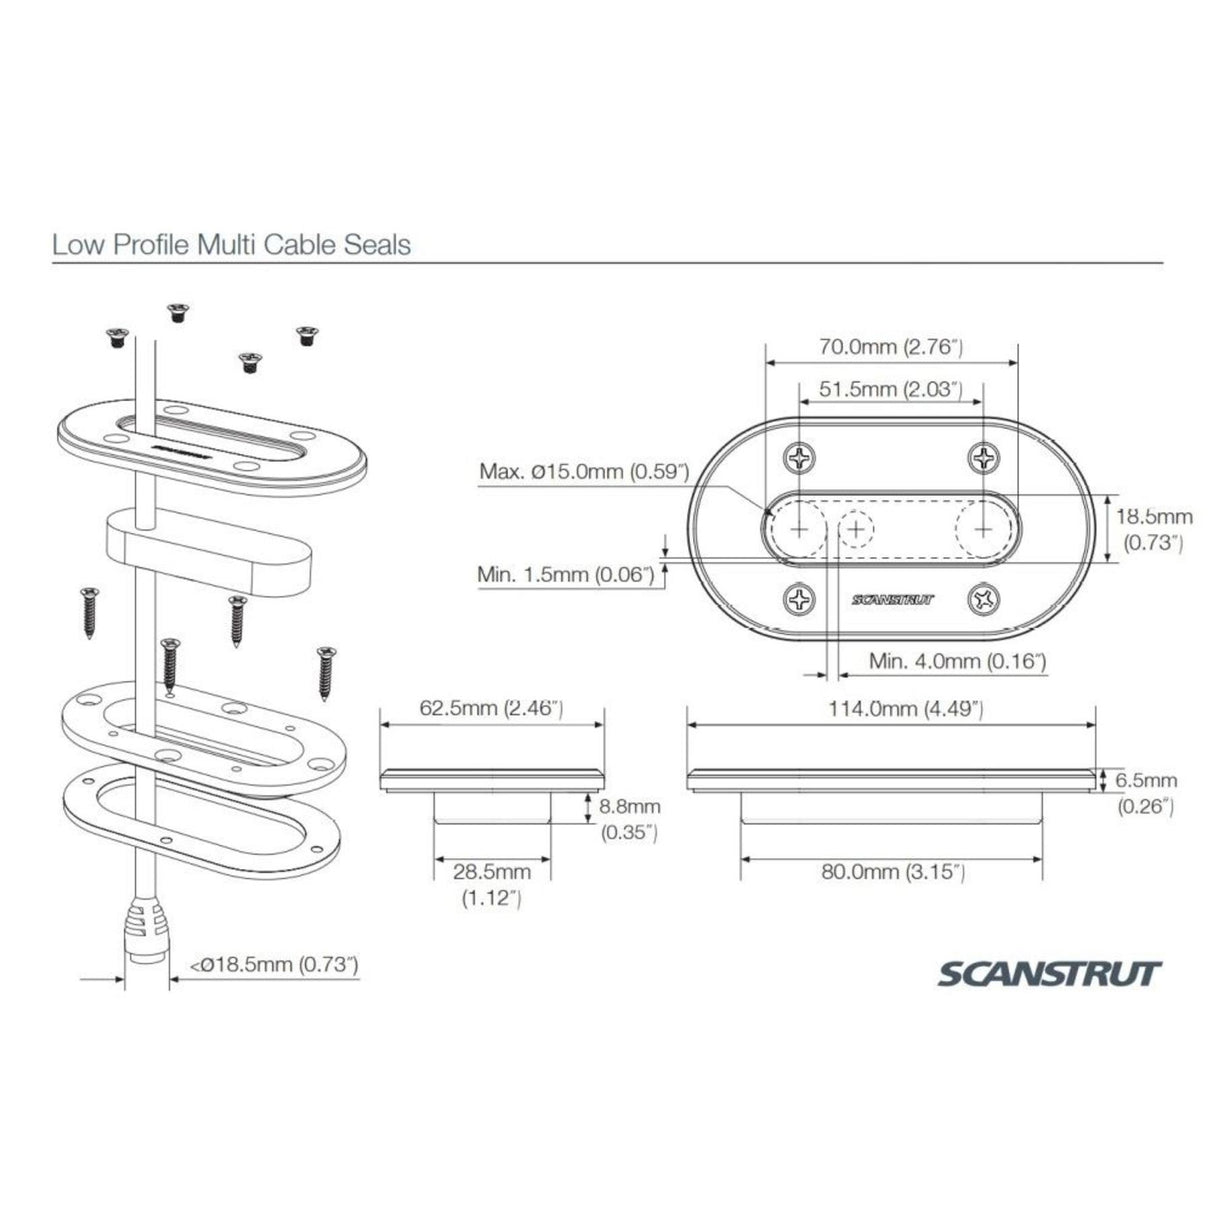 Scanstrut DS-LP-MULTI-S Stainless Steel Low Profile Multi Cable Seal